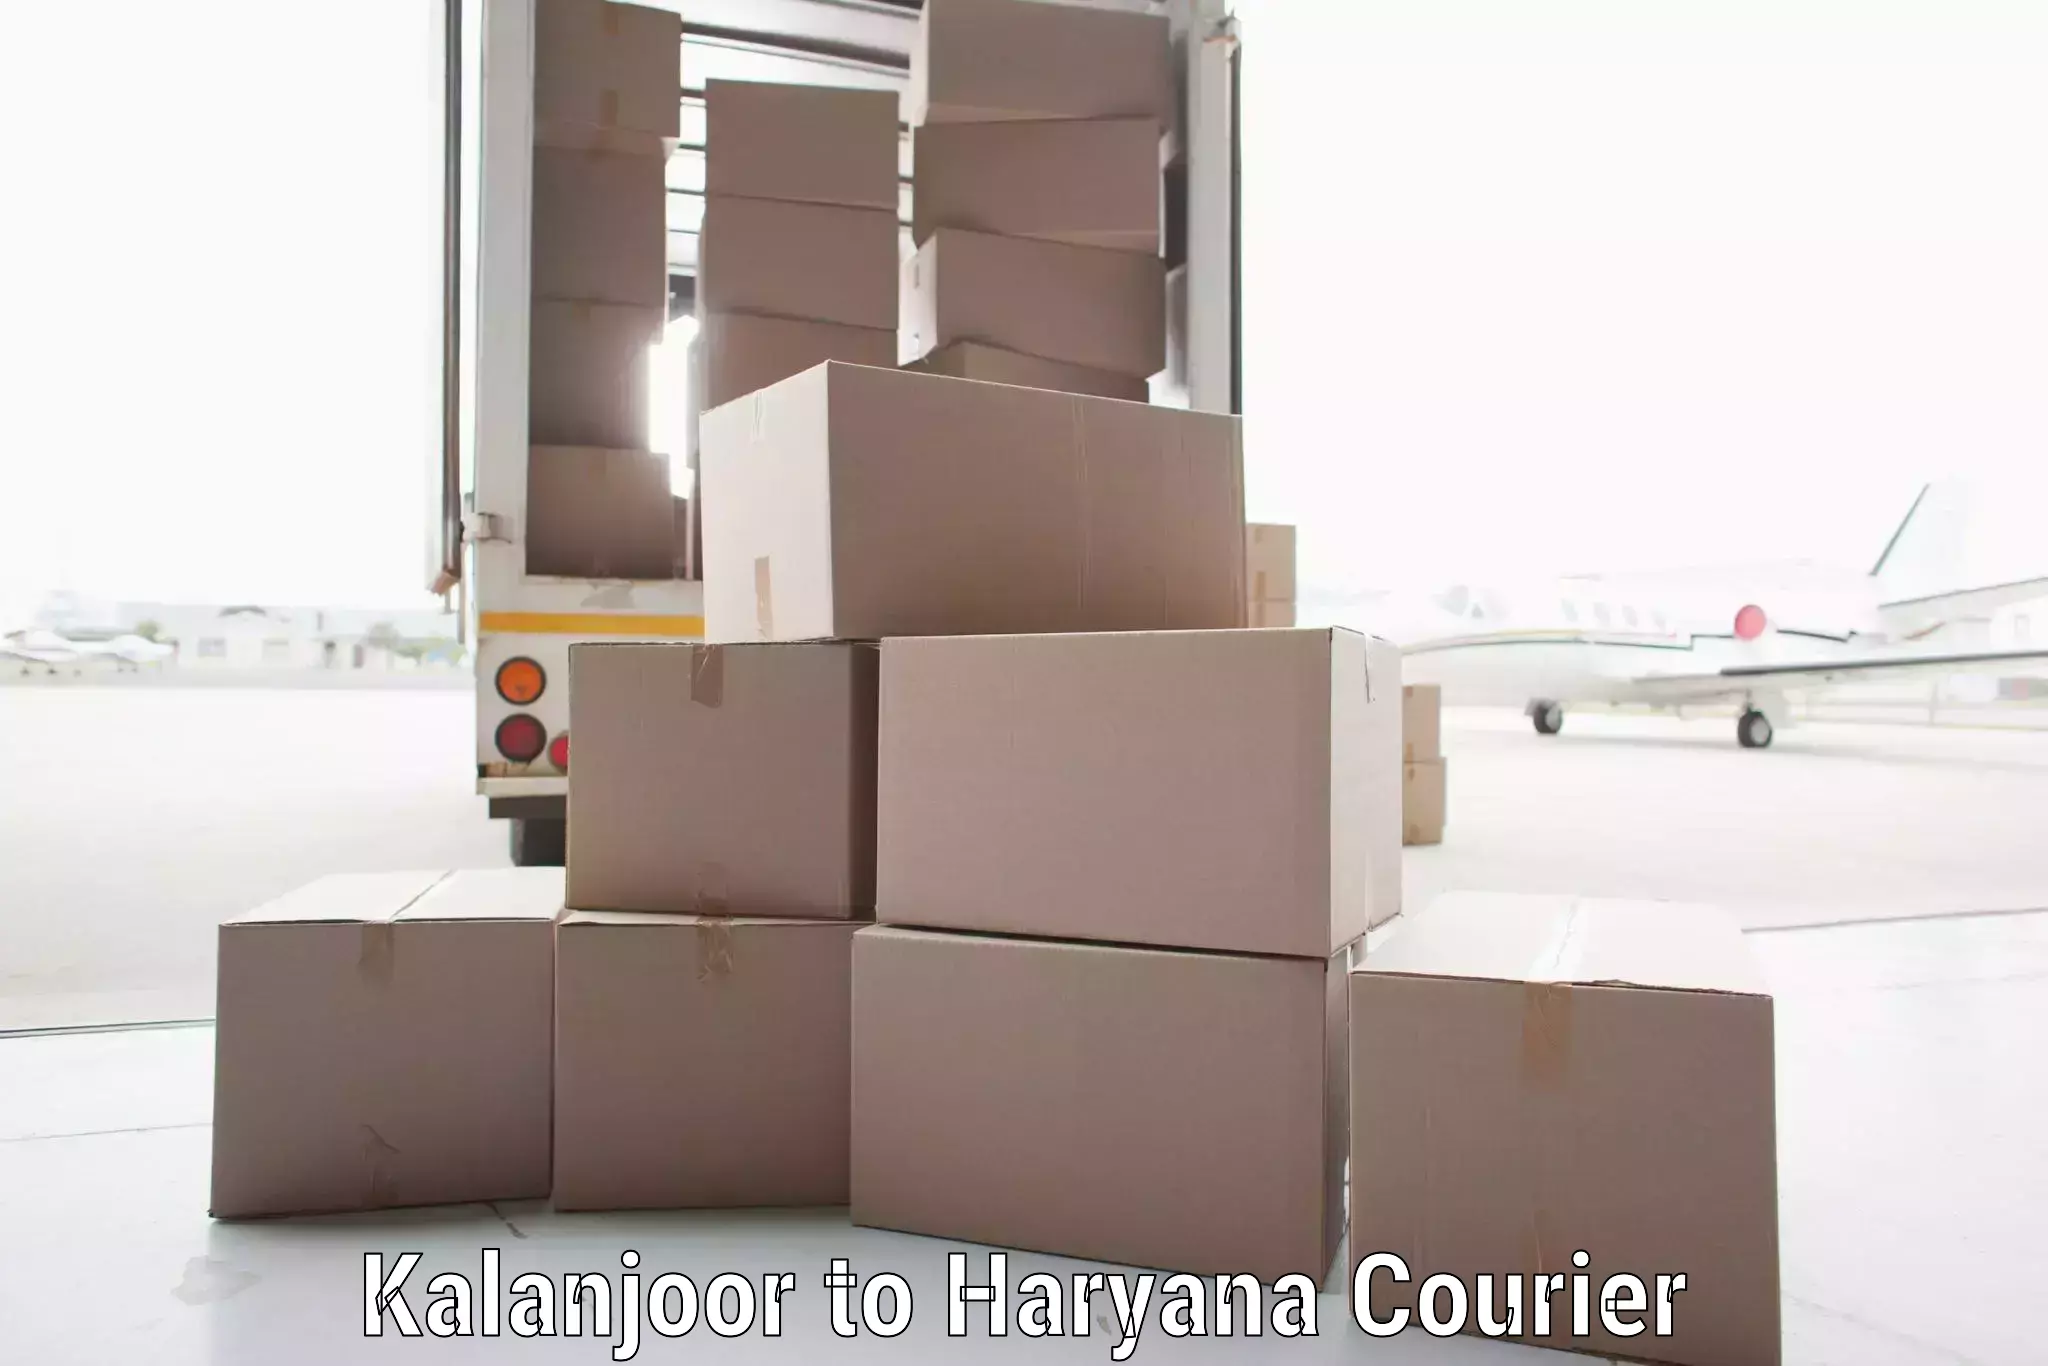 Round-the-clock parcel delivery in Kalanjoor to Sonipat